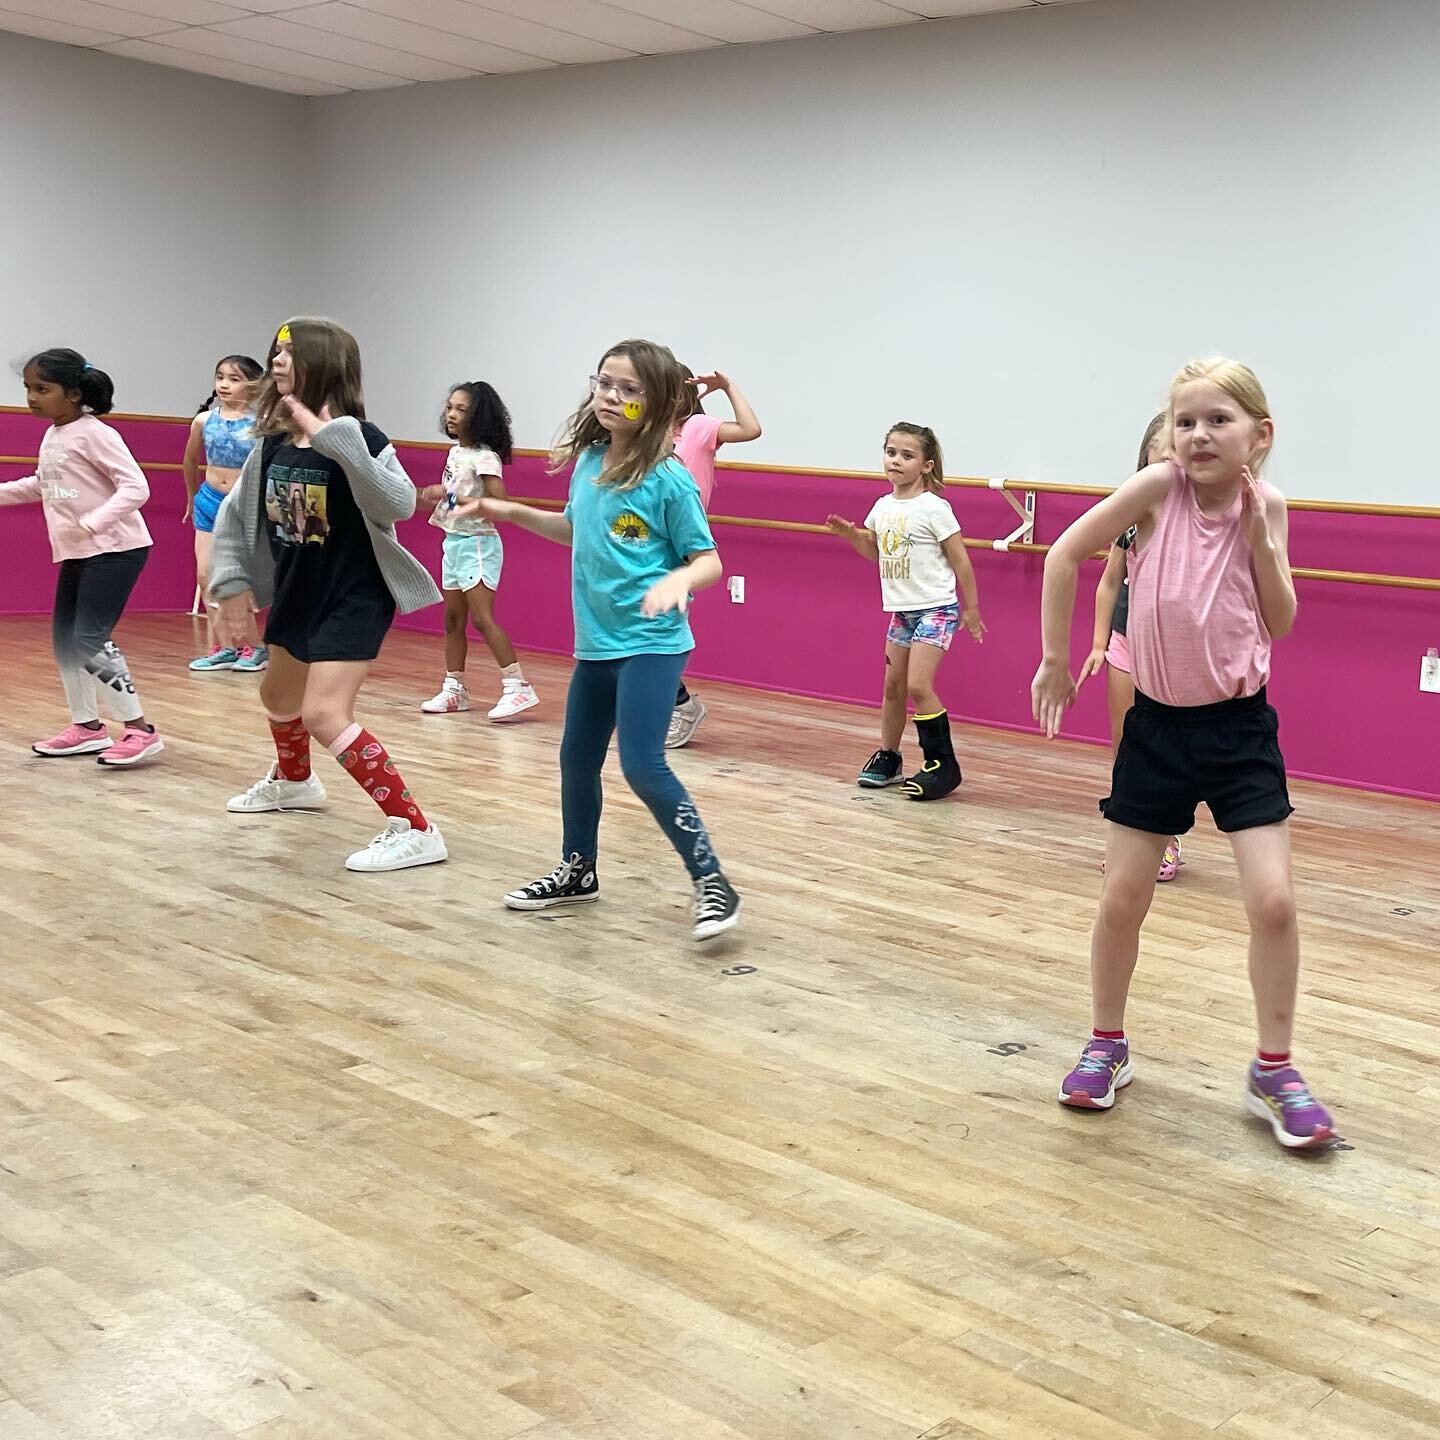 What it looks like when you are feeling the music, moves &amp; confidence! These girls are going to rock the recital stage in 2 weeks! #csodrecital #dance #dancers #letsdance #danceclass #csodyear43 #idanceatcindys #dancestudio #allentx #fairviewtx #